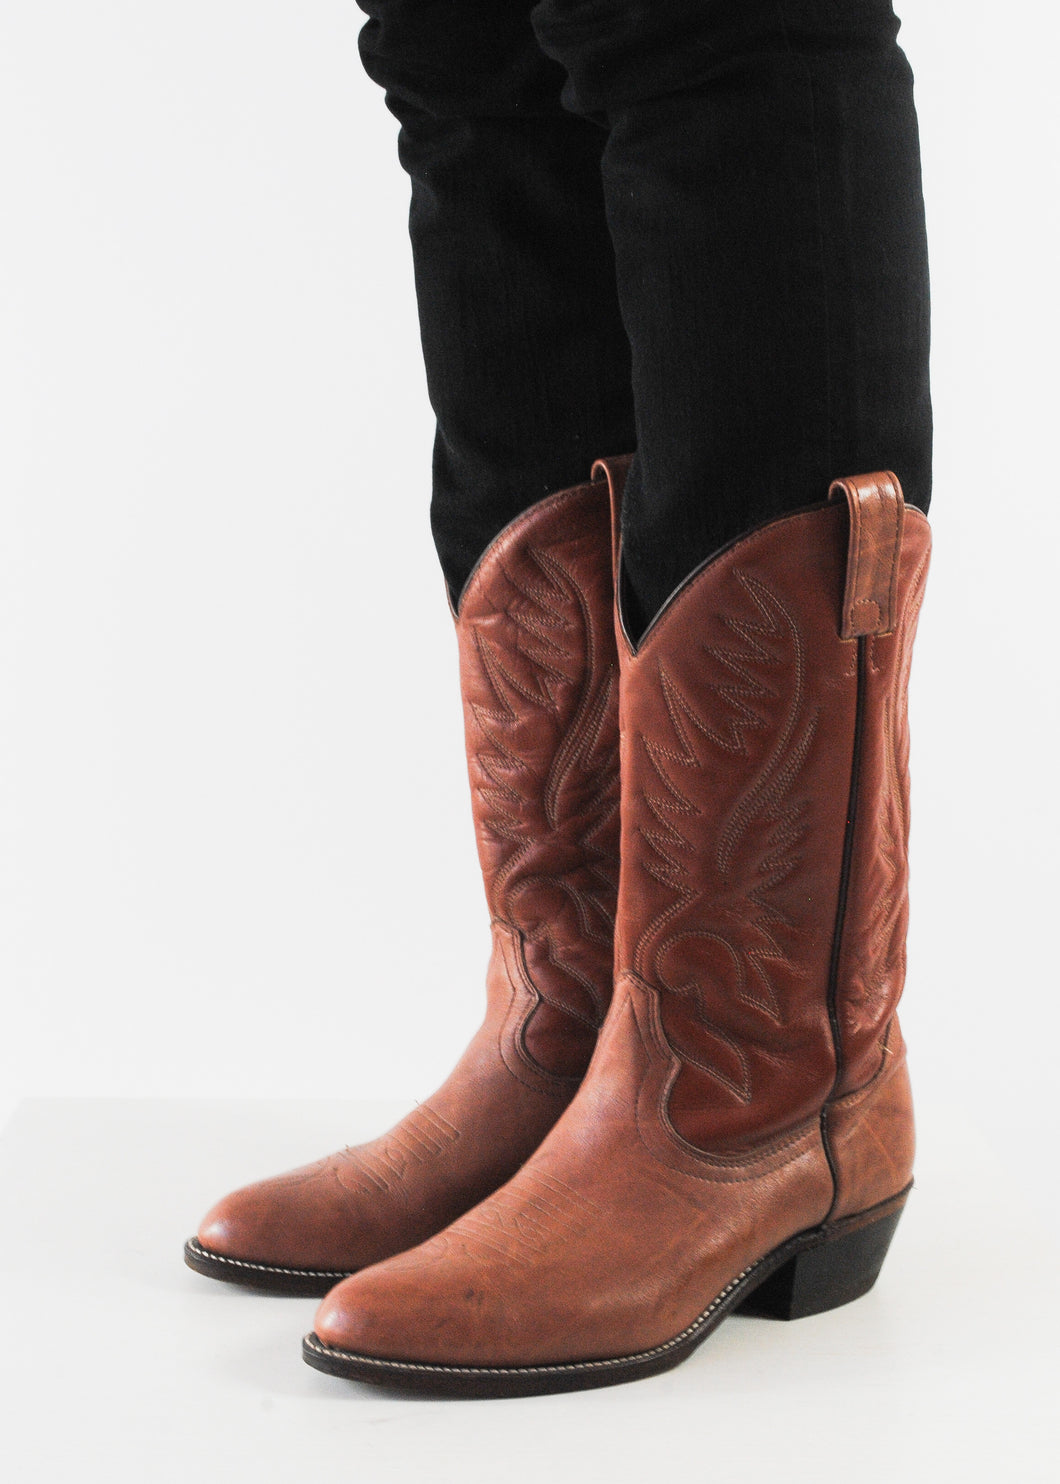 Brown Cowboy Boots, Size 9